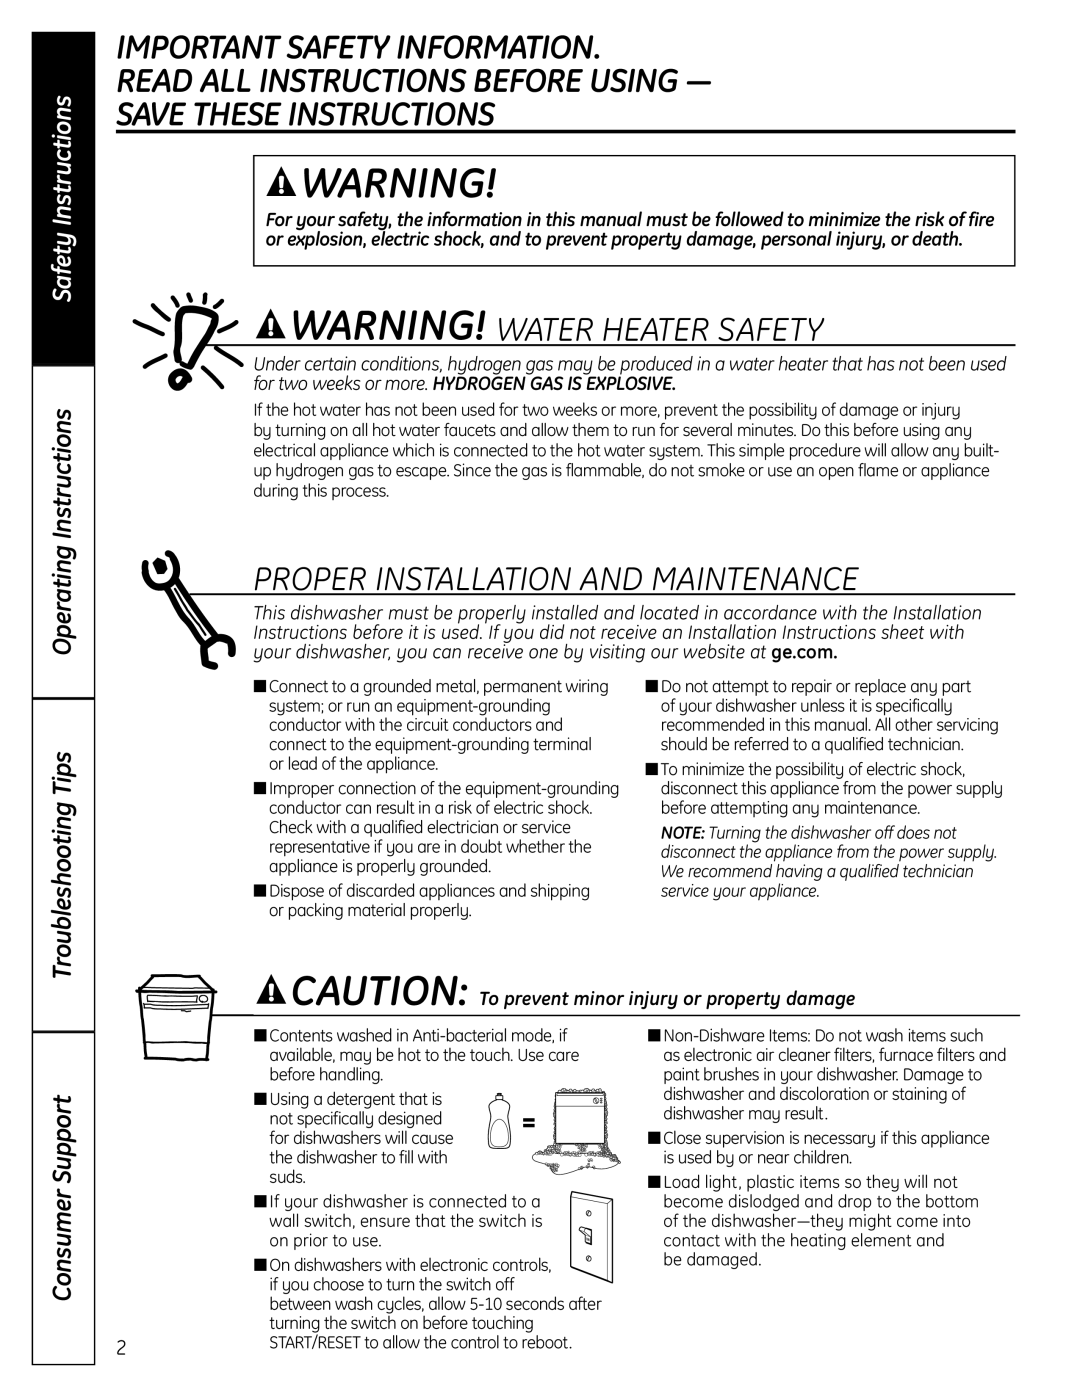 GE PDW 8800 Important Safety Information, Read All Instructions Before Using, Save These Instructions, Safety Instructions 